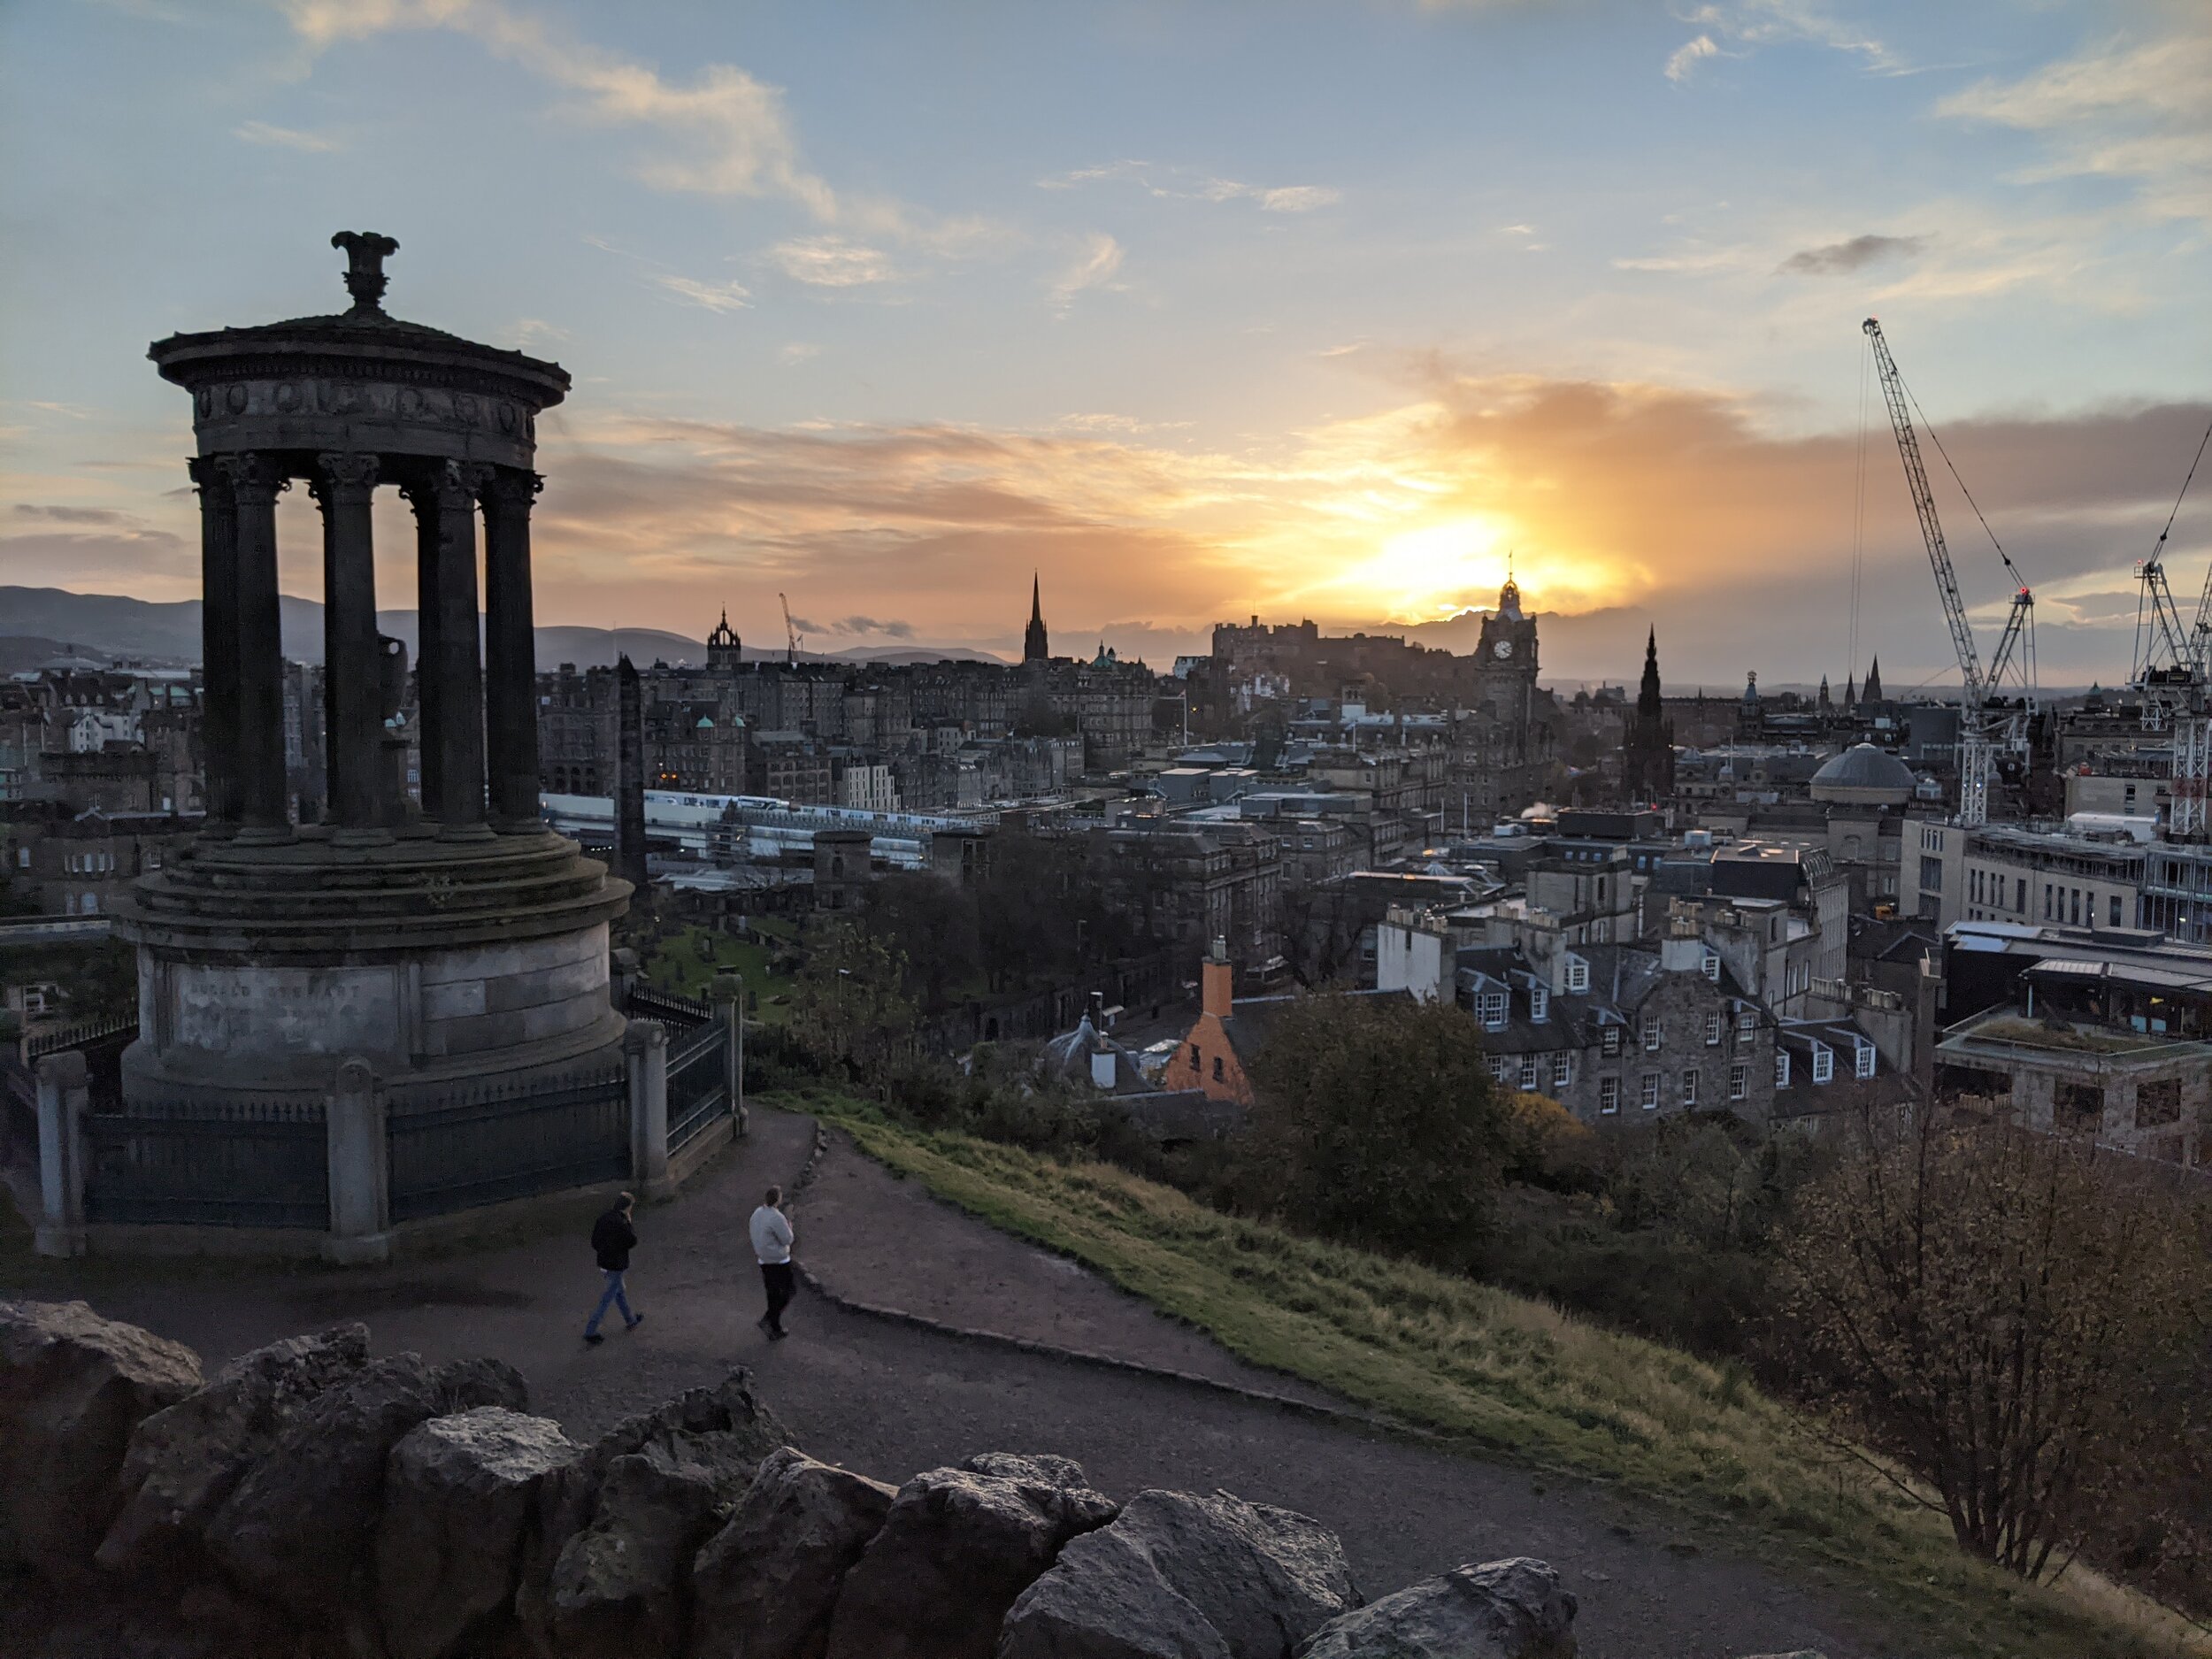 Welcome to Calton Hill, where we ass fuck you upon entry. 